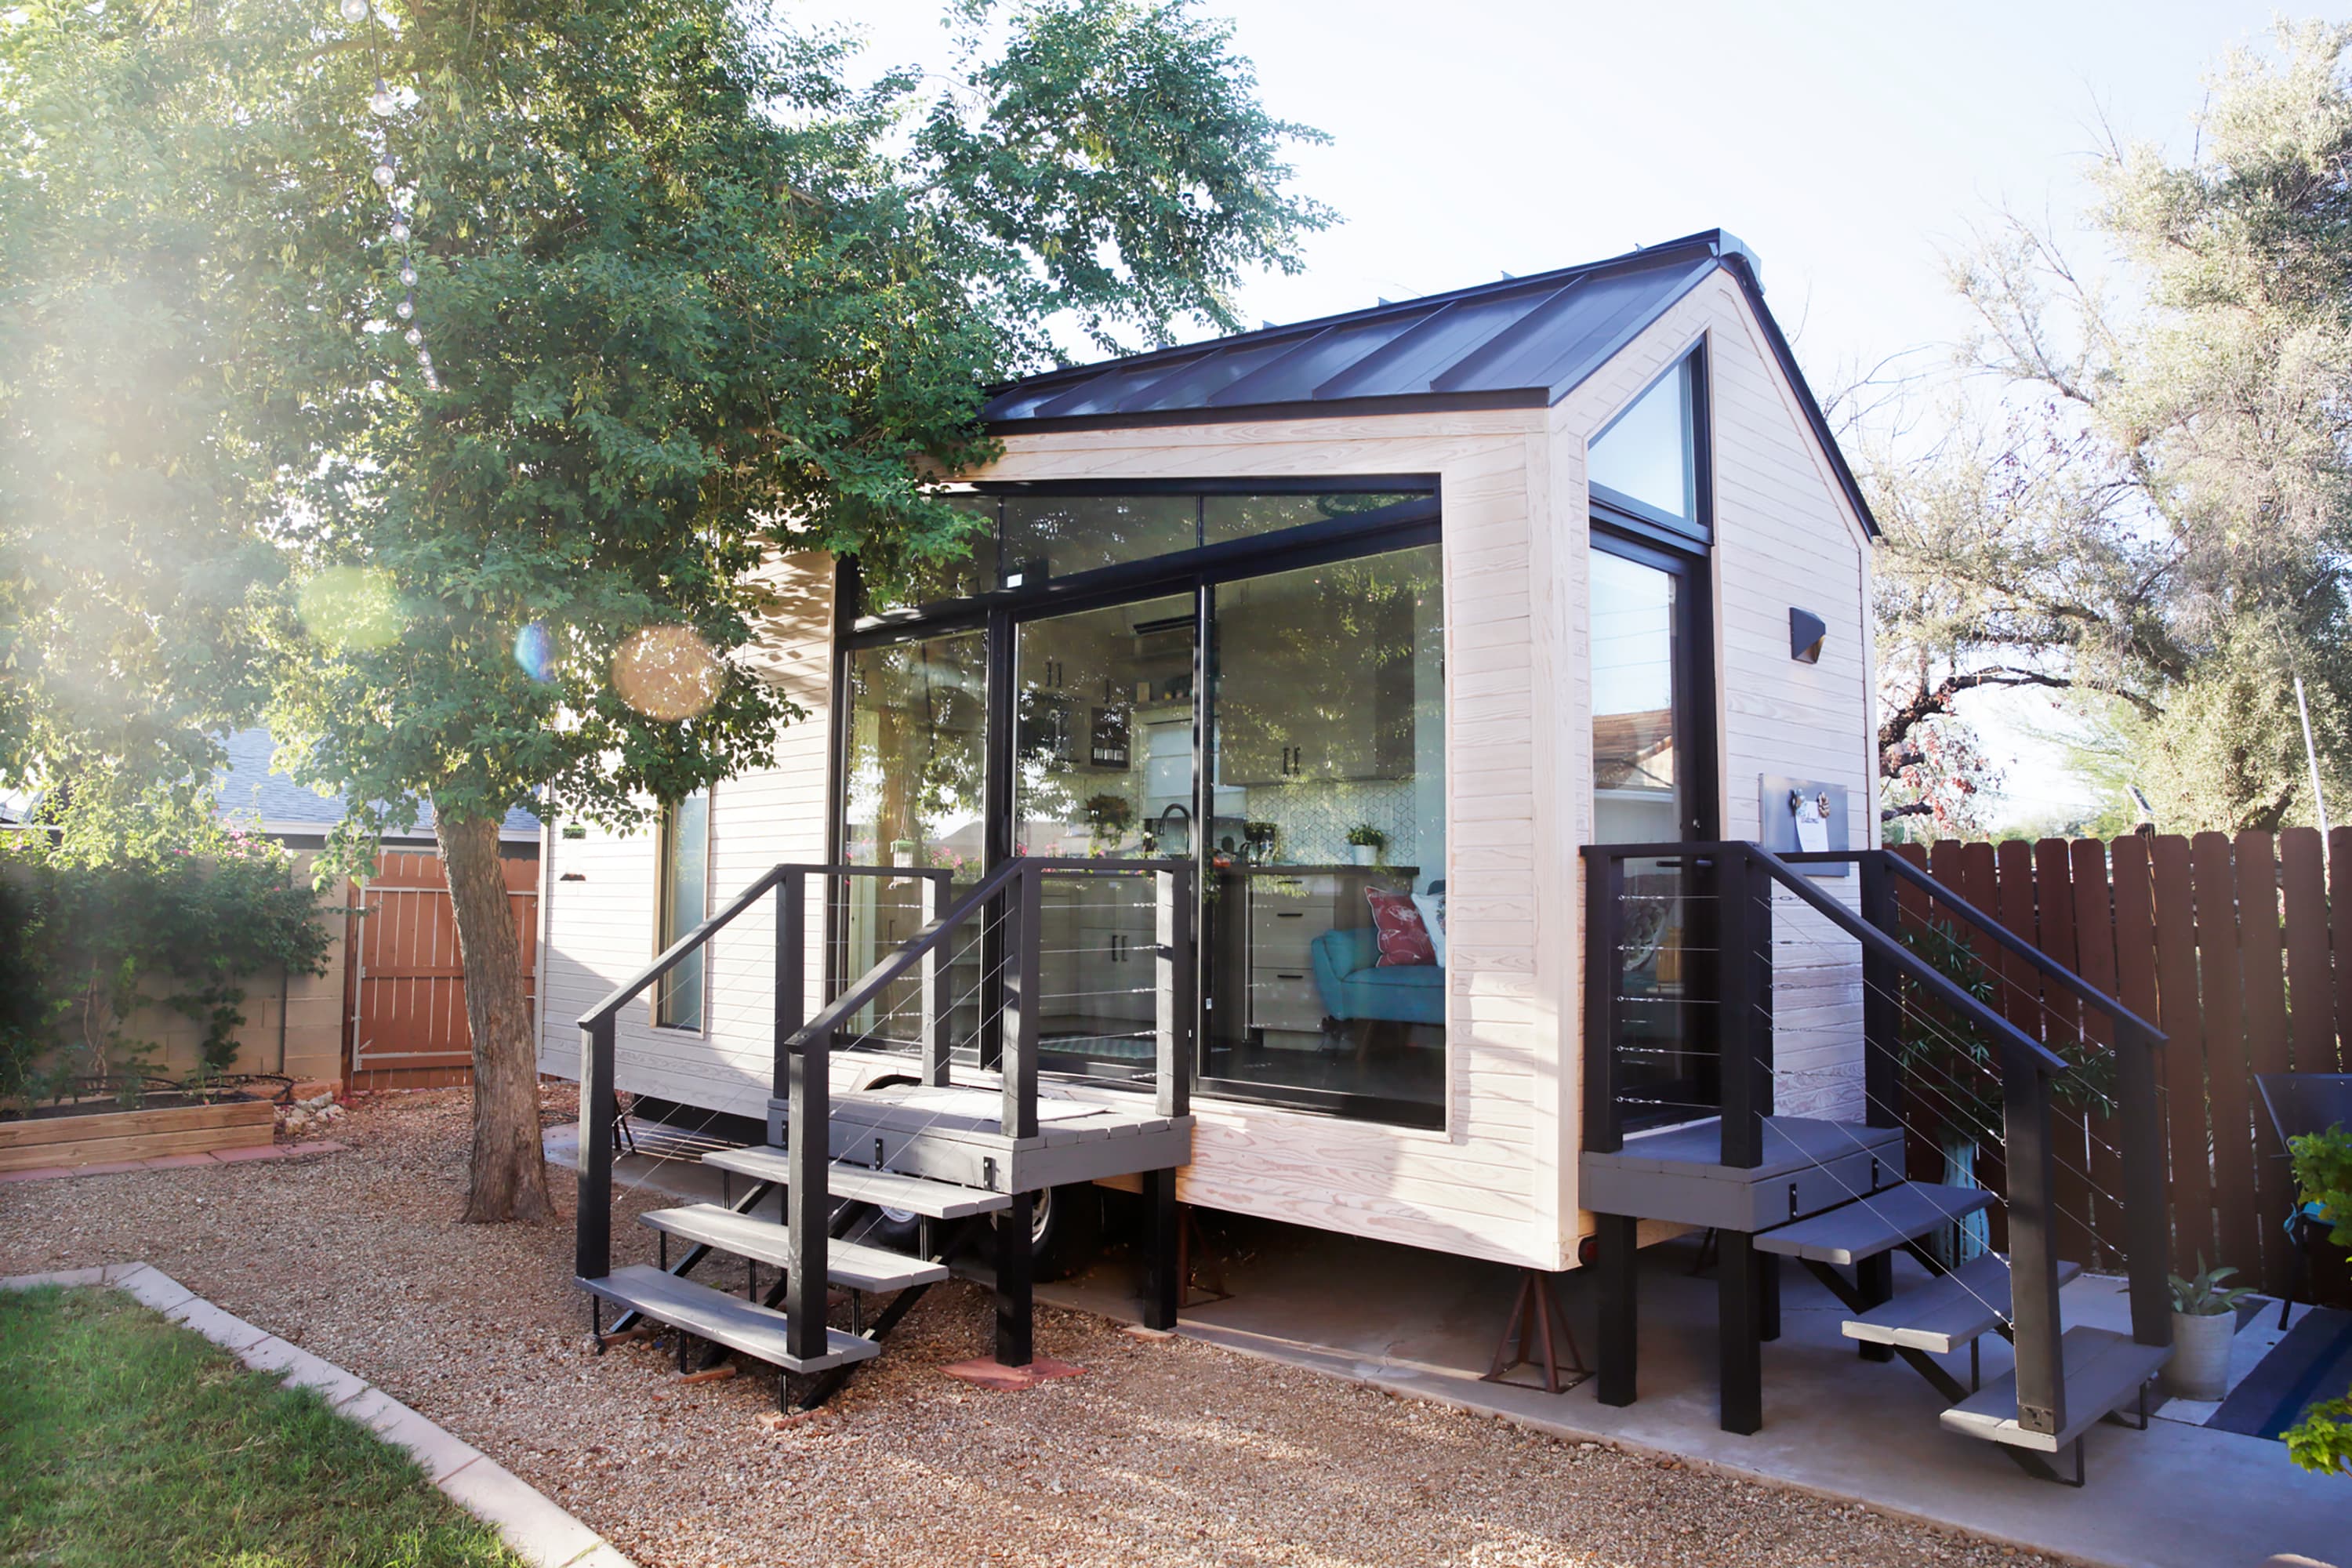 This Under $10K Tiny House from Walmart Has Two Stories